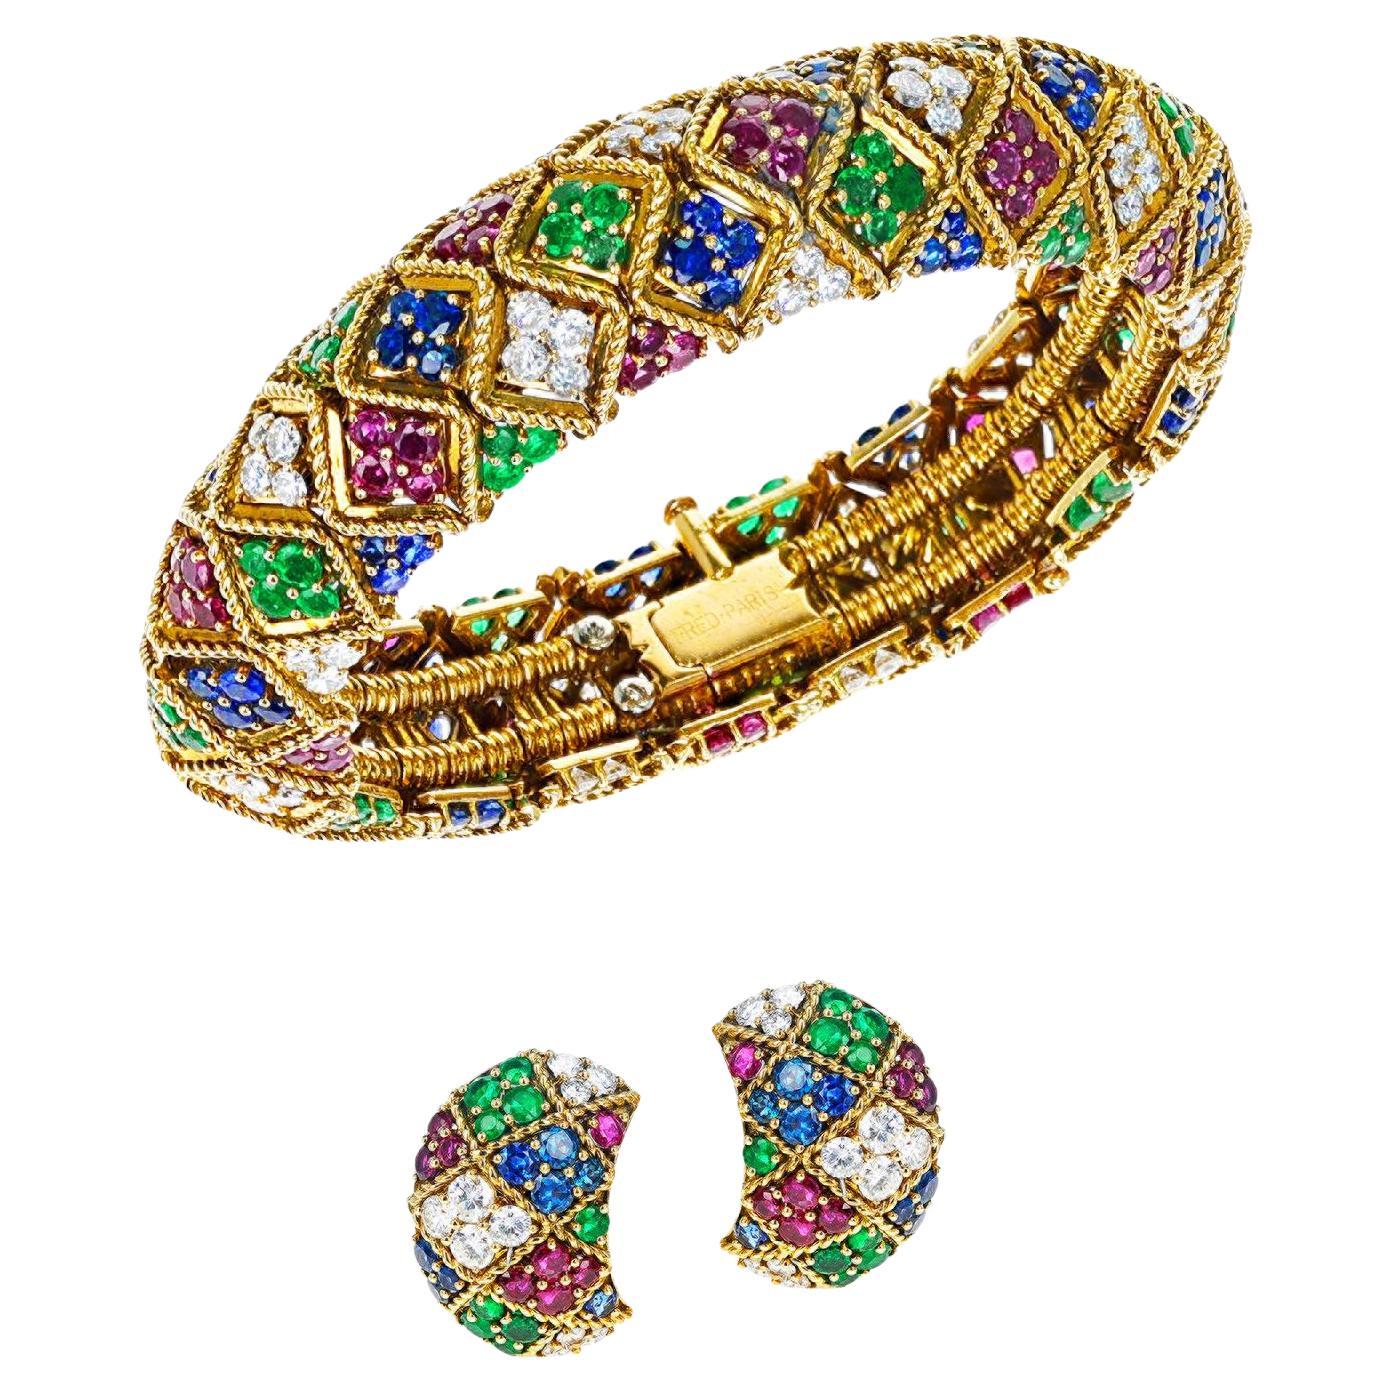 Fred Paris Ruby, Emerald, Sapphire and Diamond Bangle and Earring Set, 18k For Sale